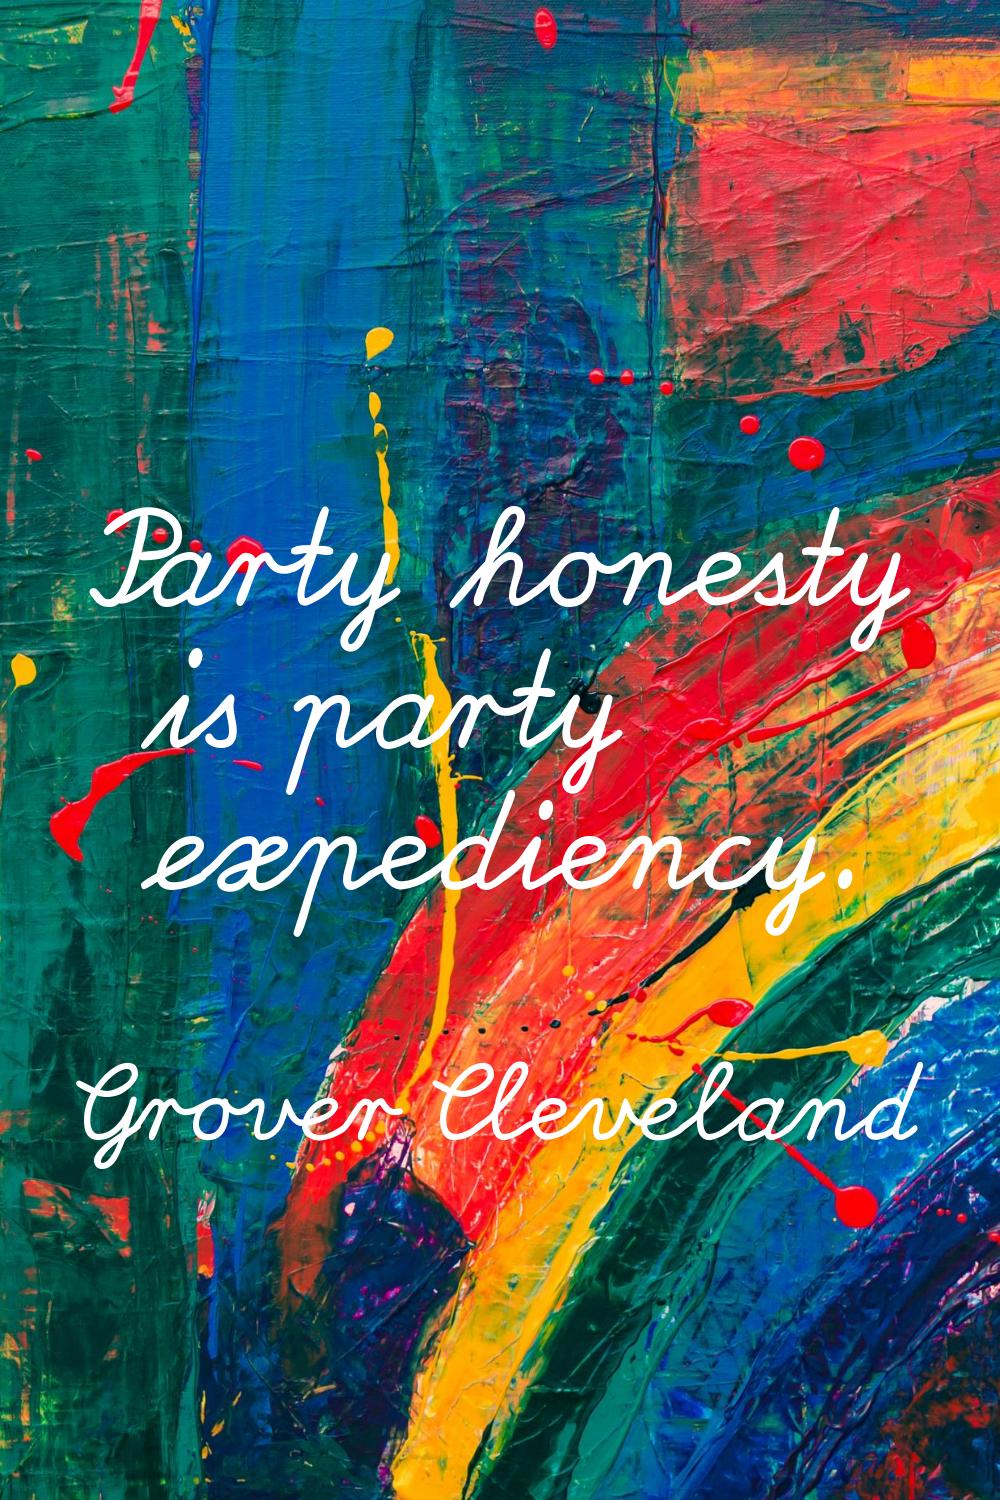 Party honesty is party expediency.